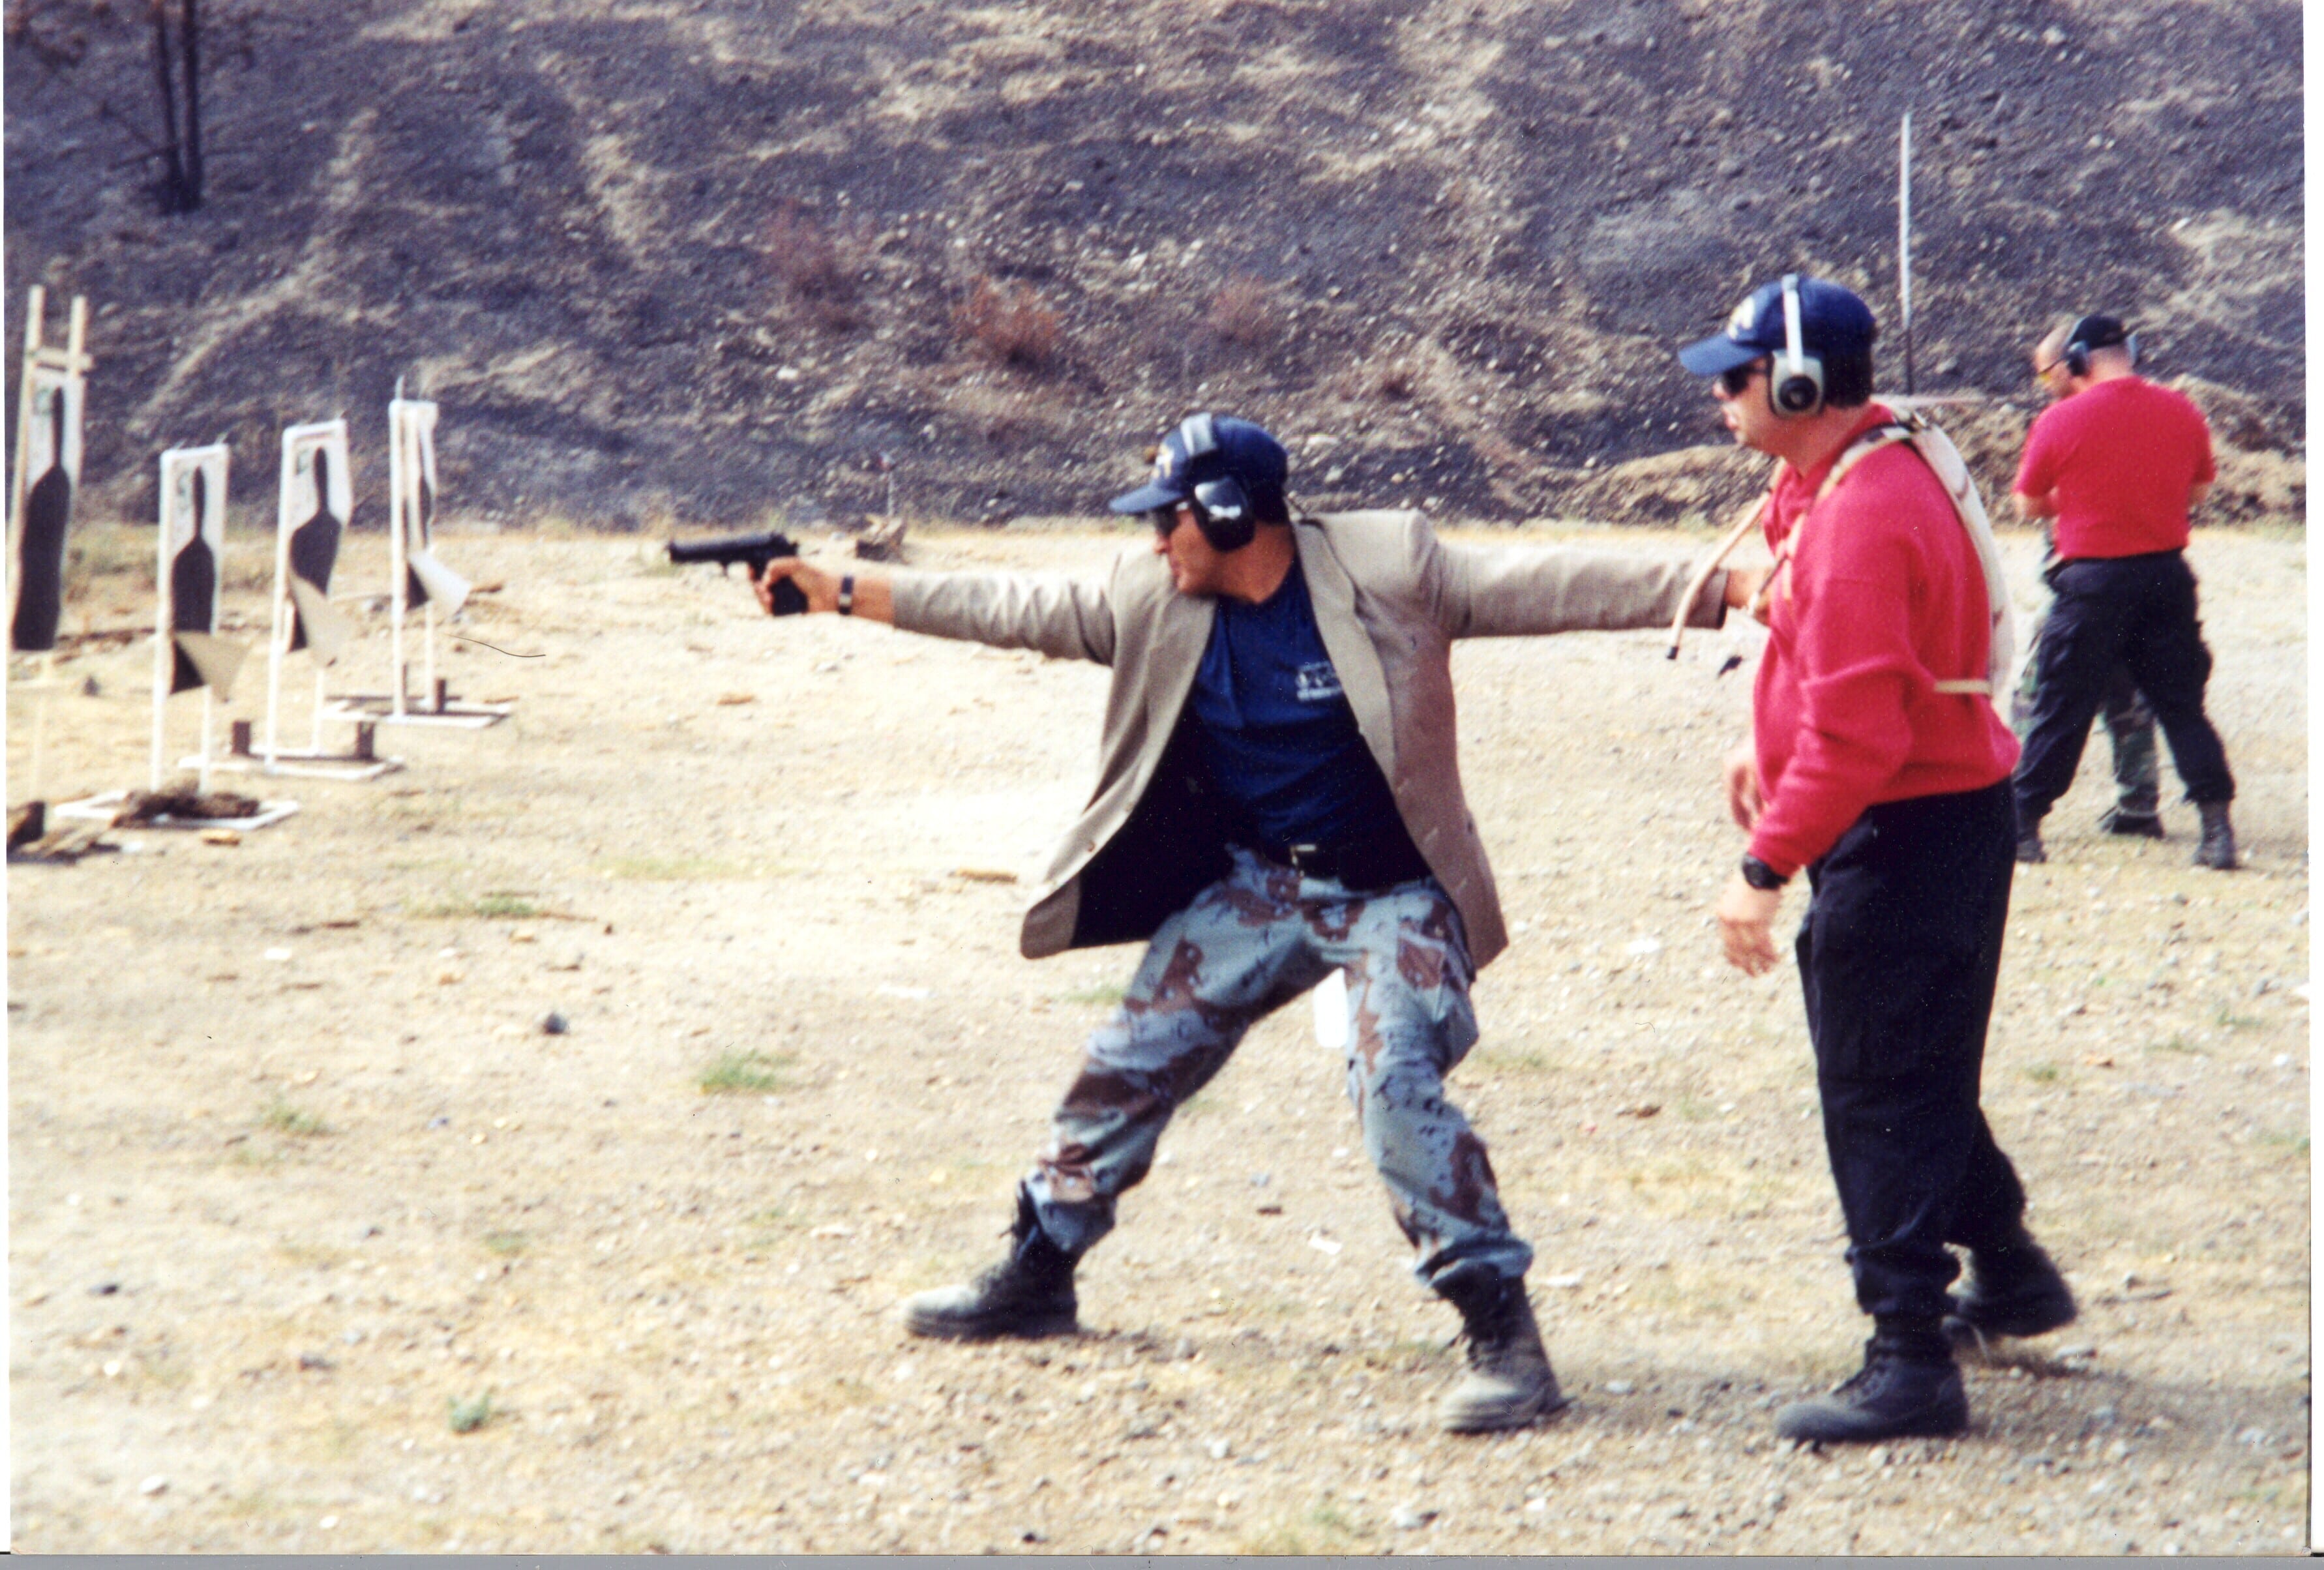 Jim (in red), playing the role of a principal, is being protected by a law enforcement officer on a live-fire range.